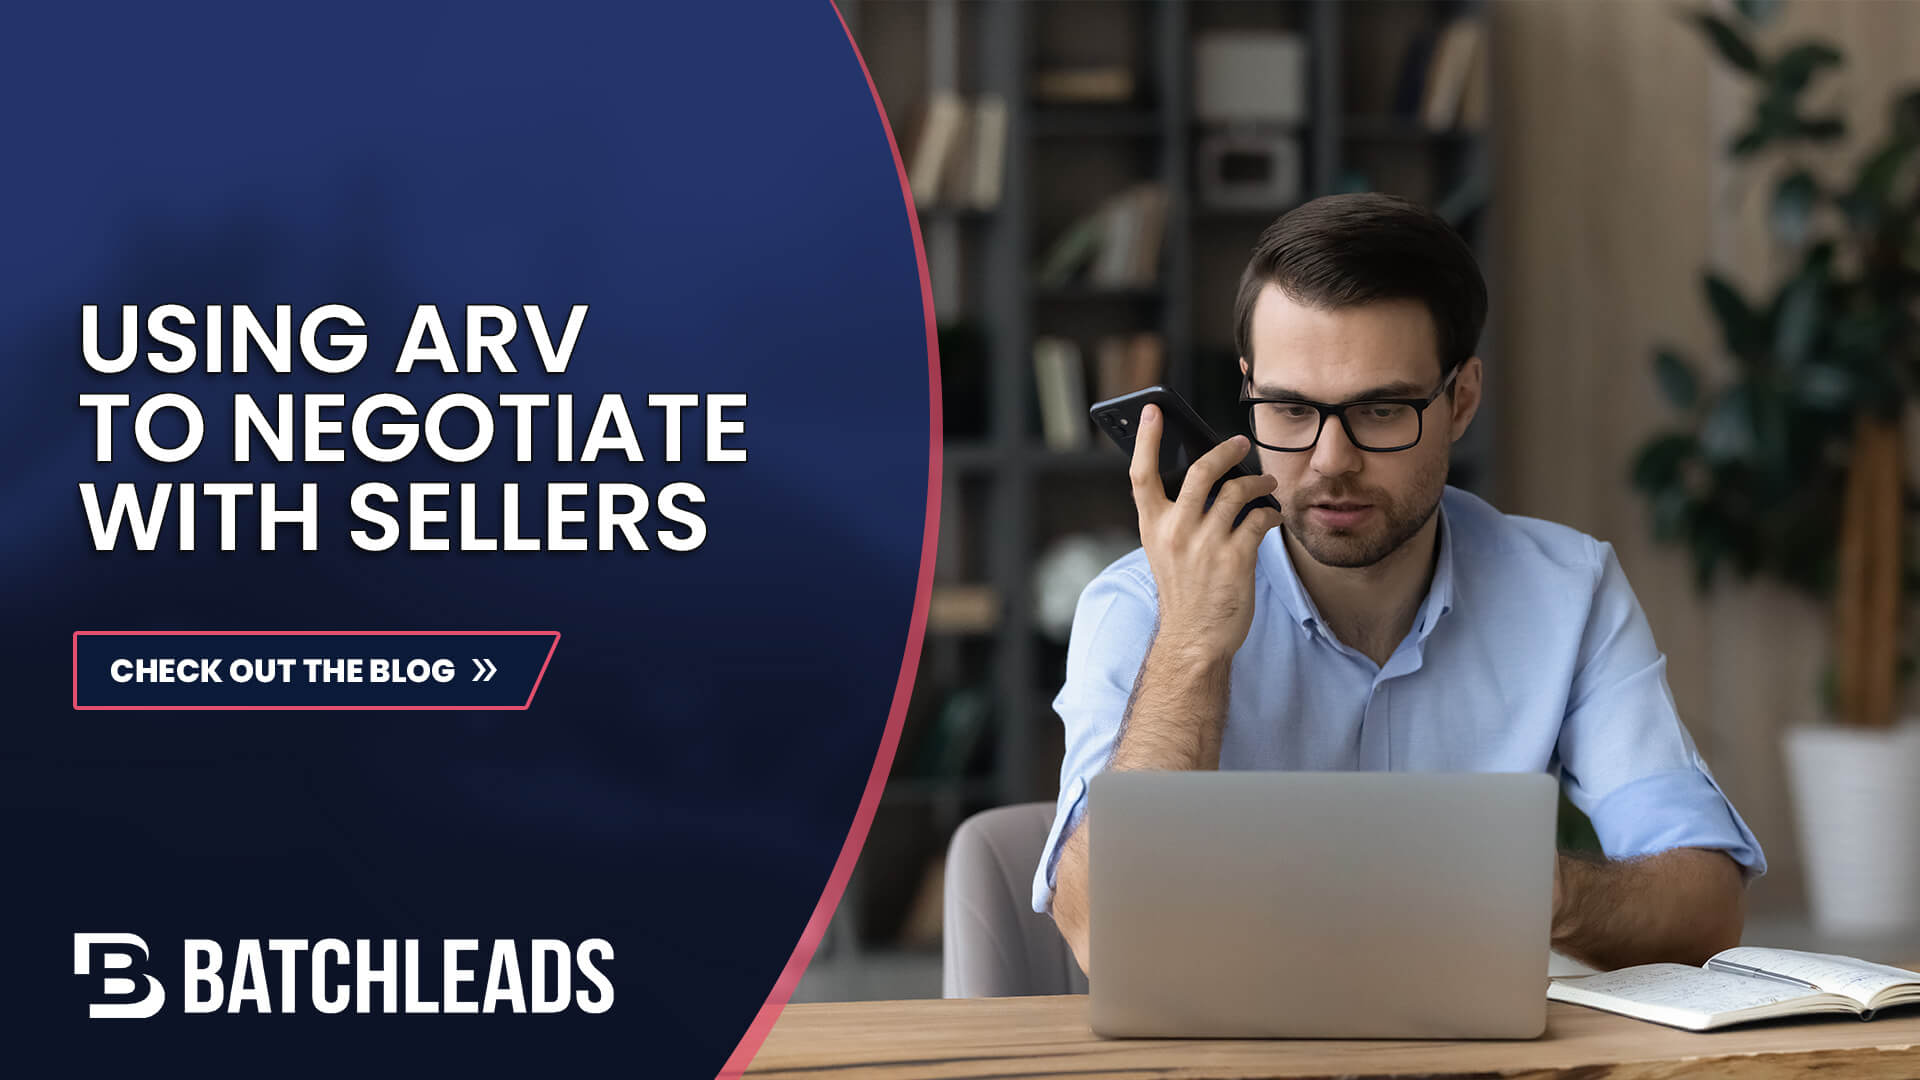 USING ARV TO NEGOTIATE WITH SELLERS